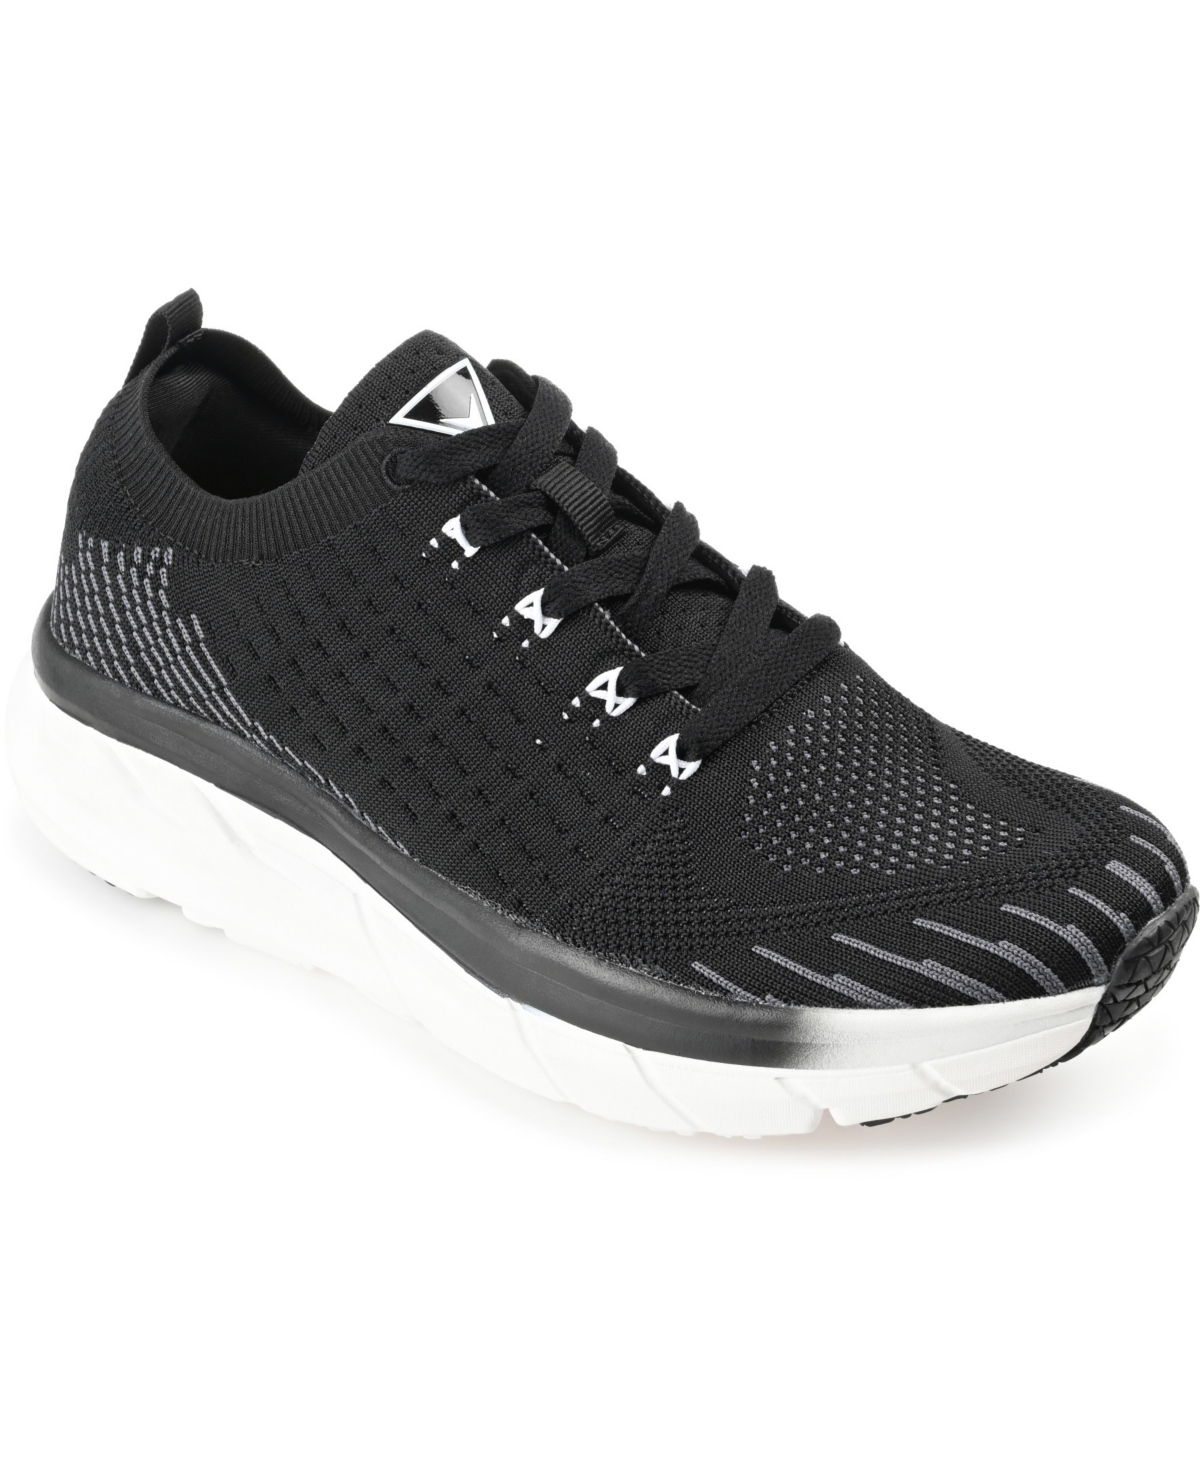 Men's Curry Knit Walking Sneakers - White